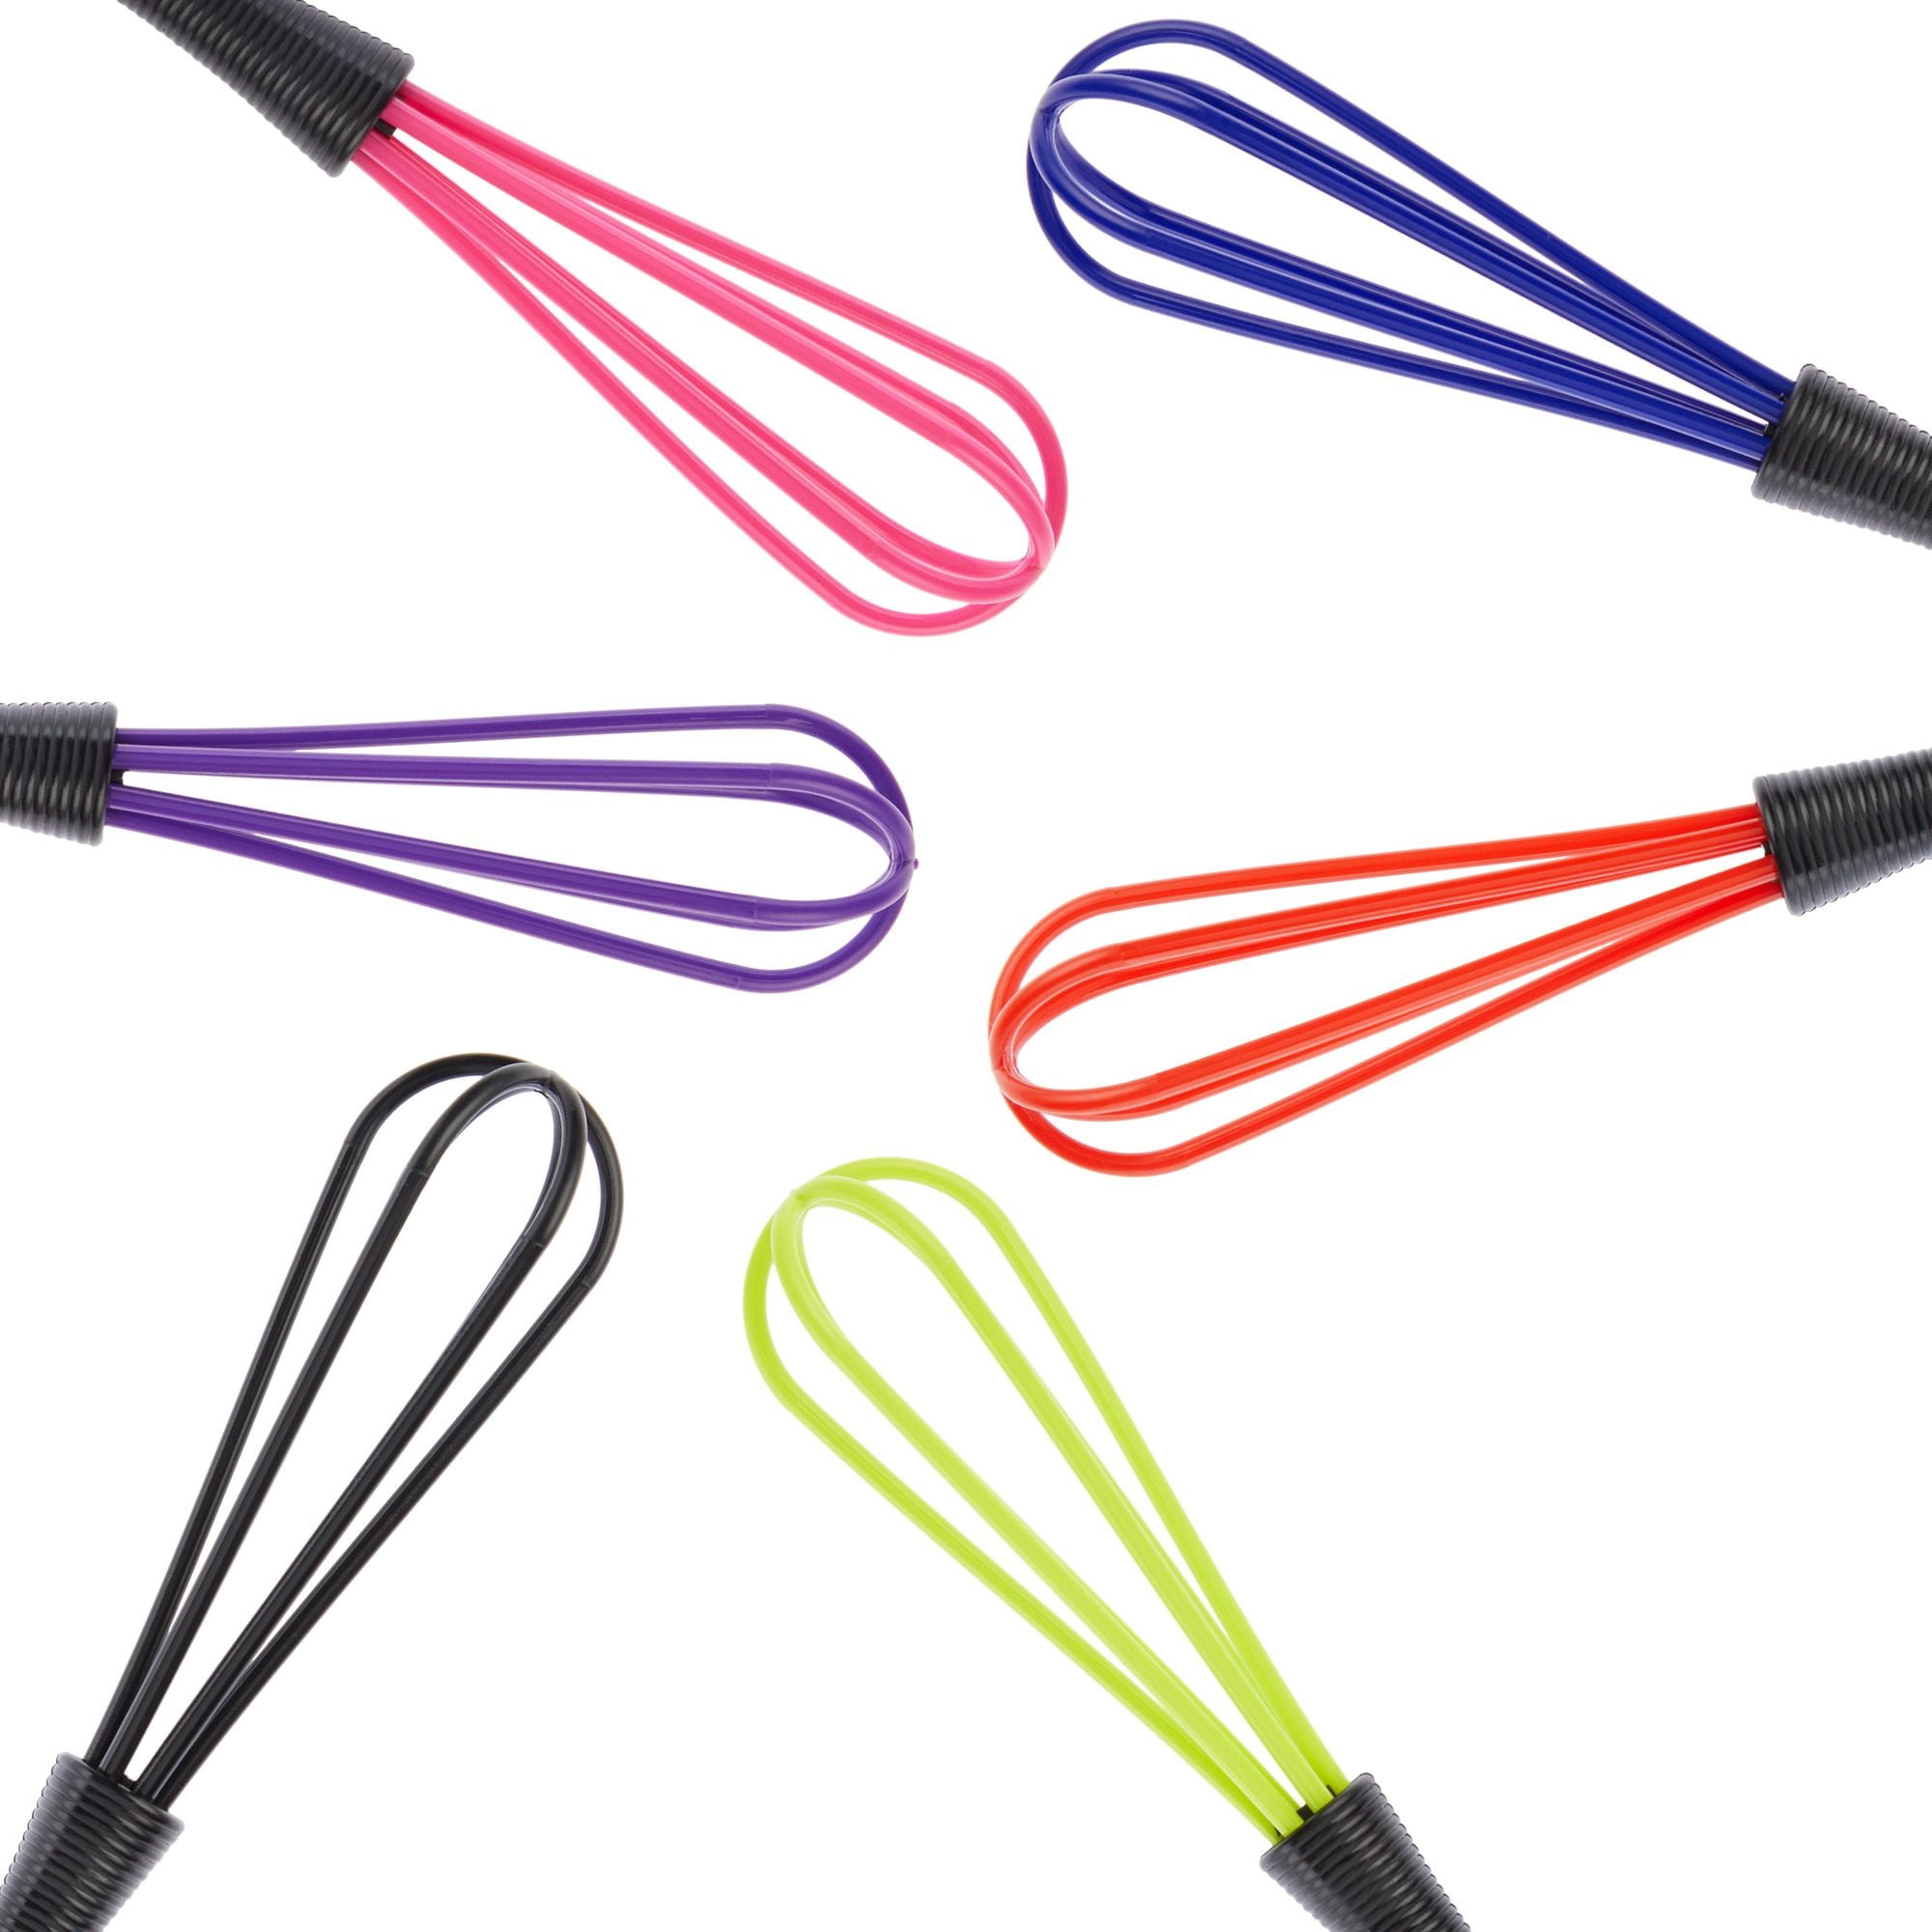 Glamlily 6 Pack Mini Whisk Set For Hair Dye Color Mixing, Cream Mixer,  Salon Or Home Use 7 X 1.2 In. : Target